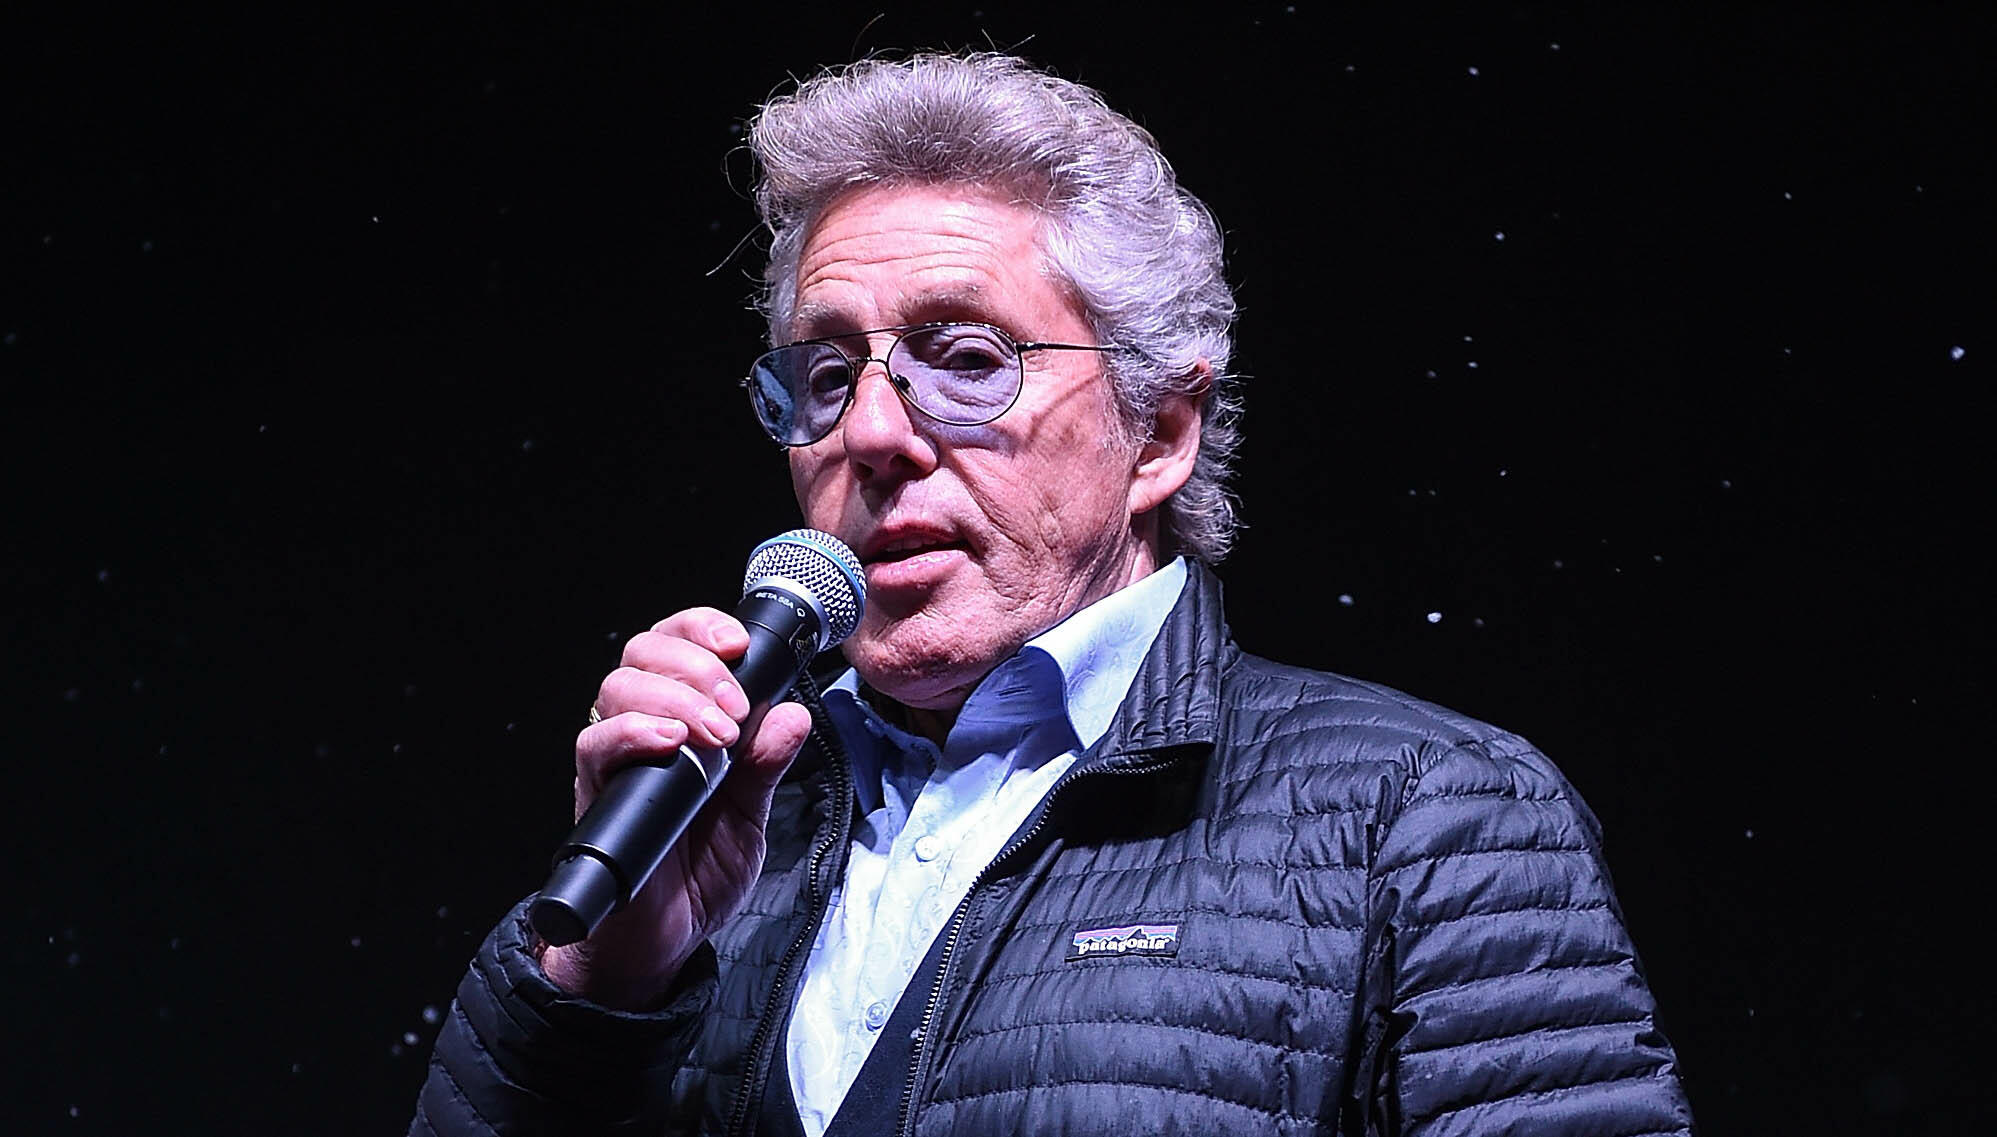 Roger Daltrey Says 'Real' Fans Of The Who Know He Can't Stand Pot Smoke